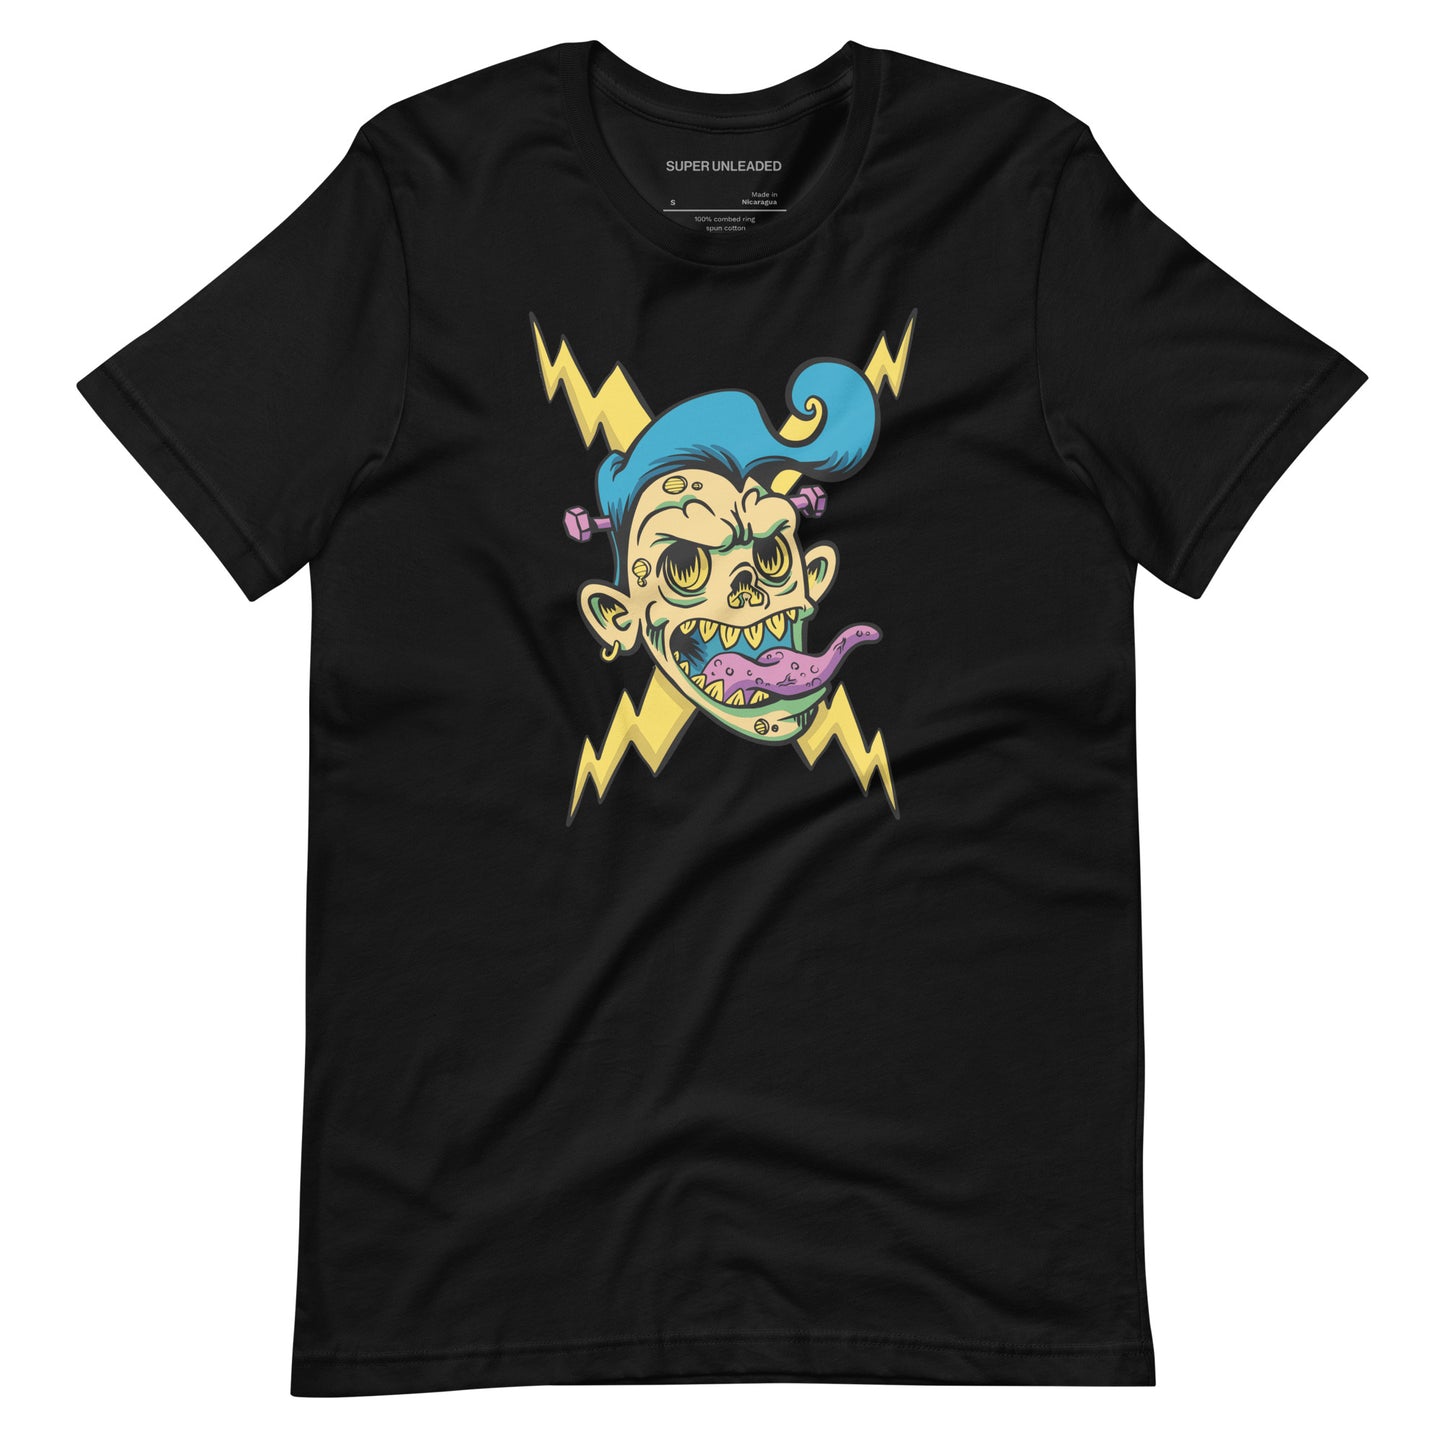 Electric Zombie T-shirt